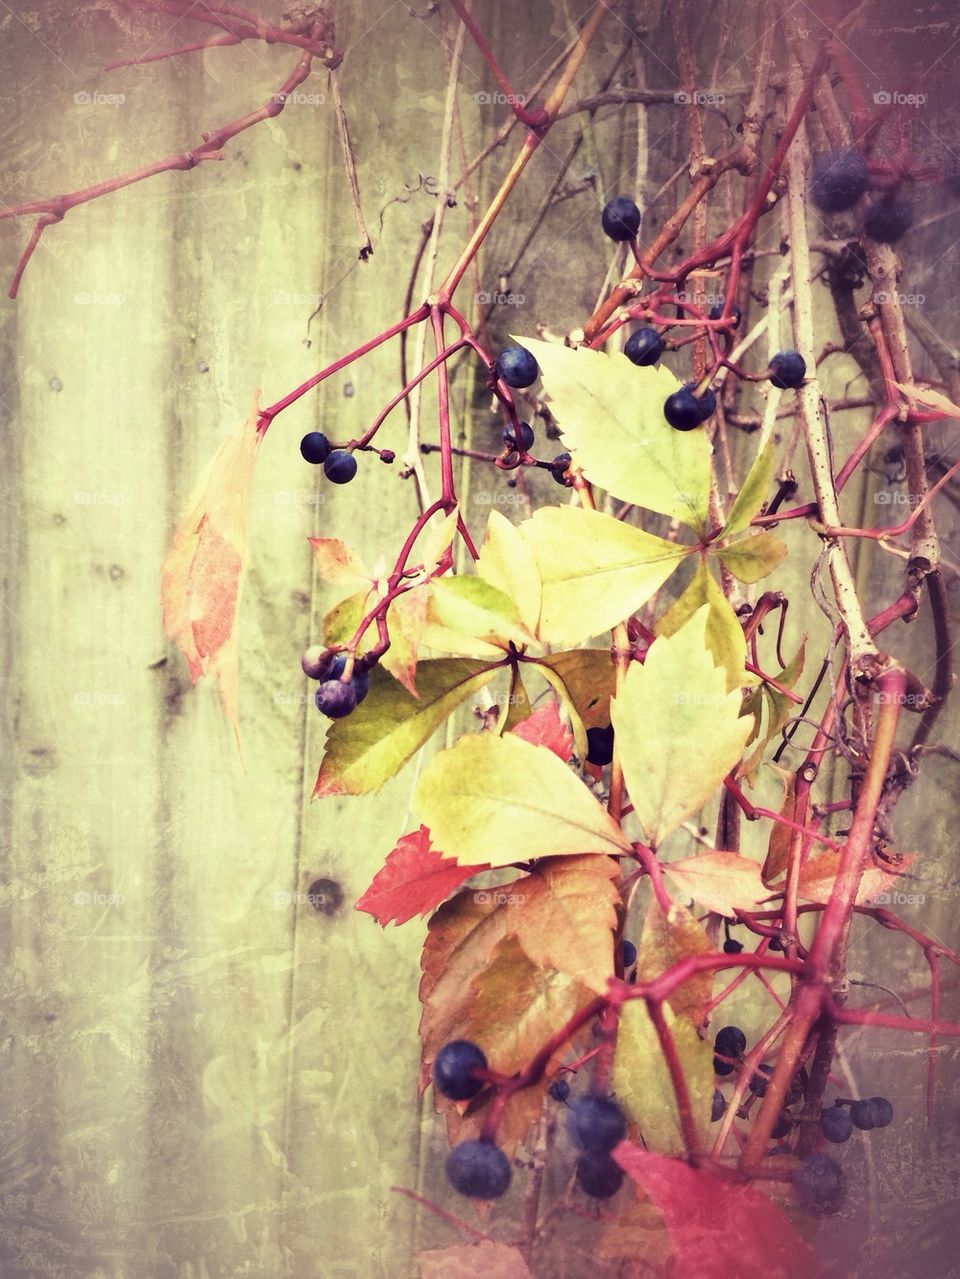 Autumn leaves and berries